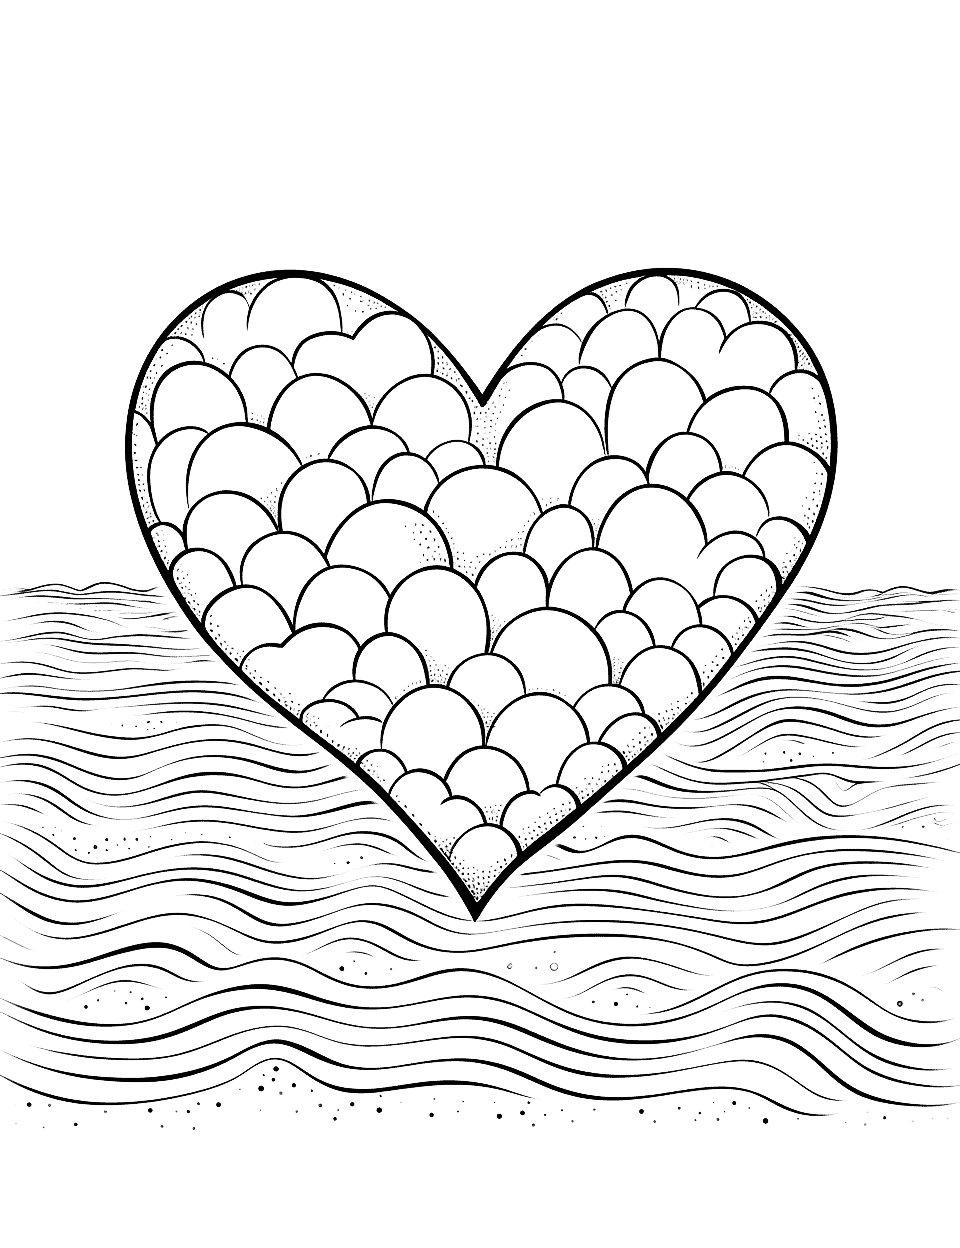 Hearts on the Beach Heart Coloring Page - Hearts drawn on a sandy beach by the waves.